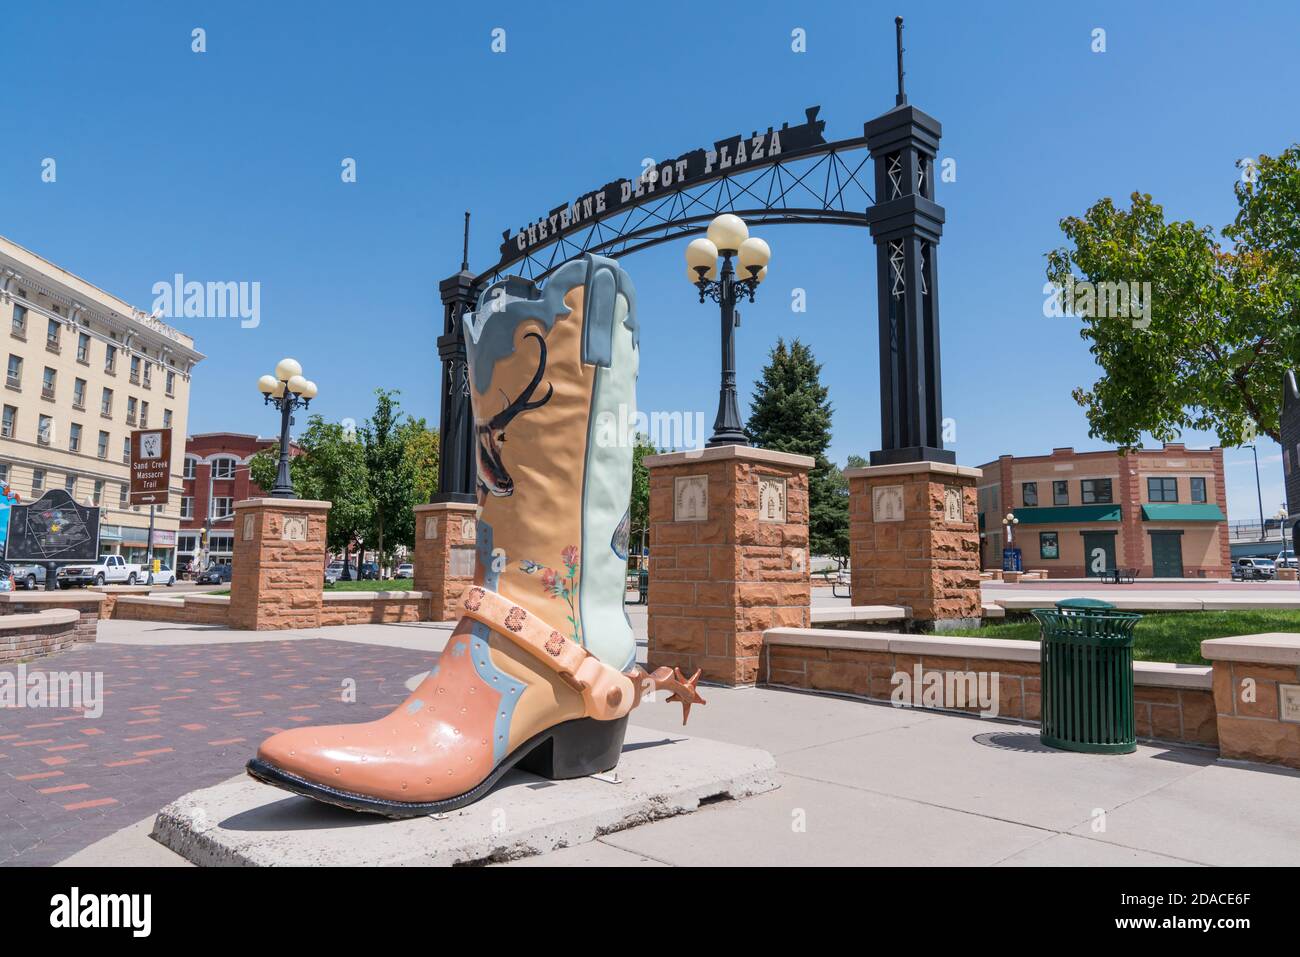 Cheyenne, WY - August 8, 2020: Large cowboy boot art sculpture outside in the historic Cheyenne Depot Park in downtown Cheyenne, Wyoming Stock Photo